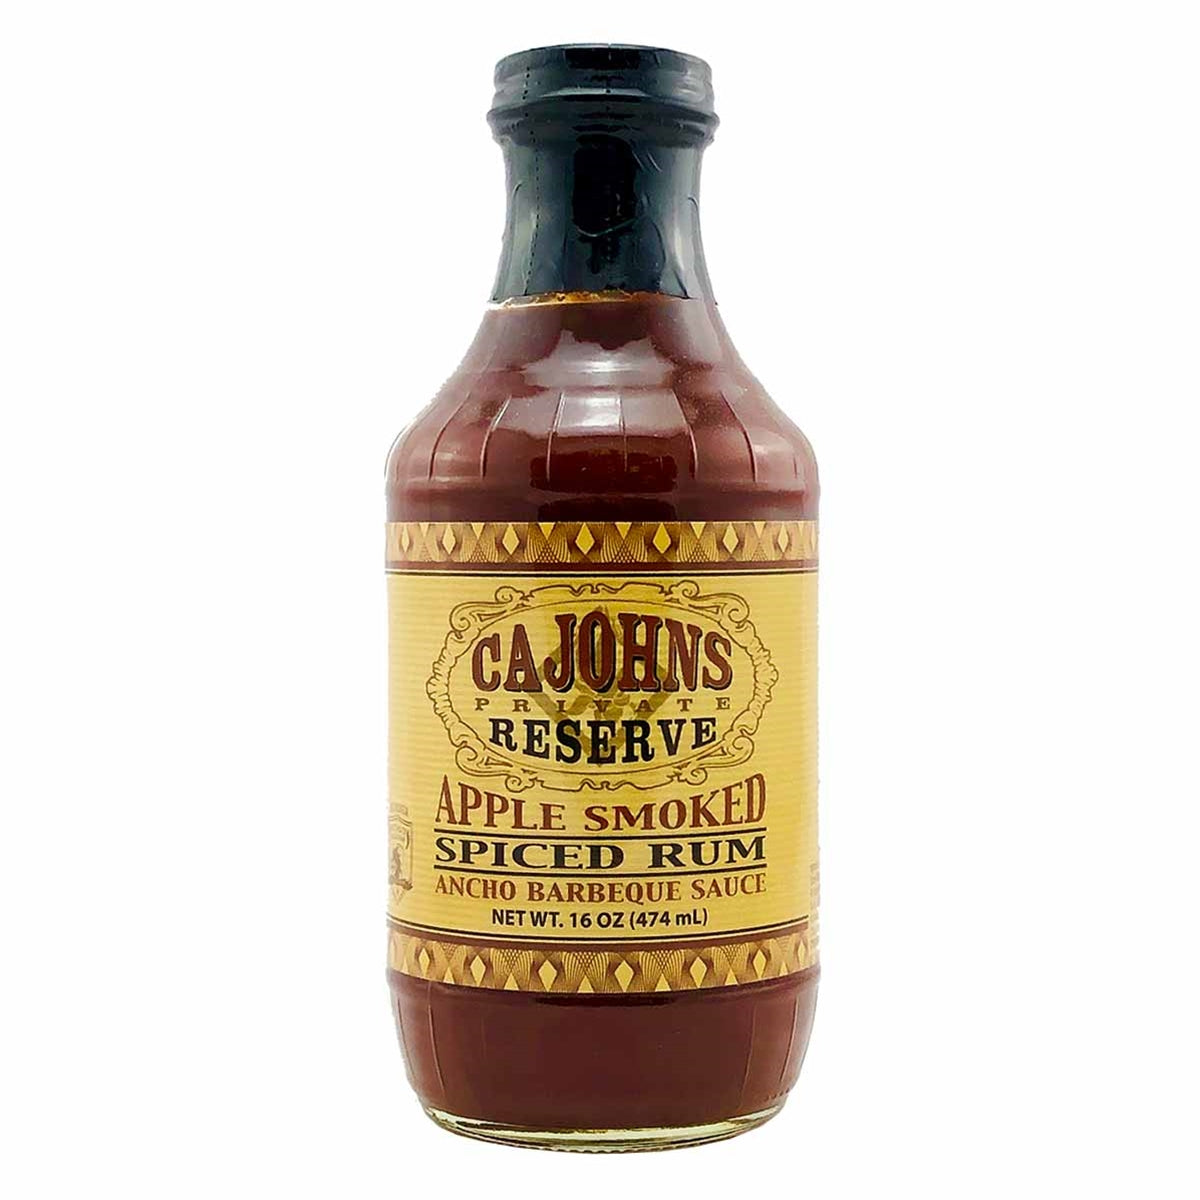 Cajohn's Apple Smoked Spiced Rum Ancho Barbeque Sauce